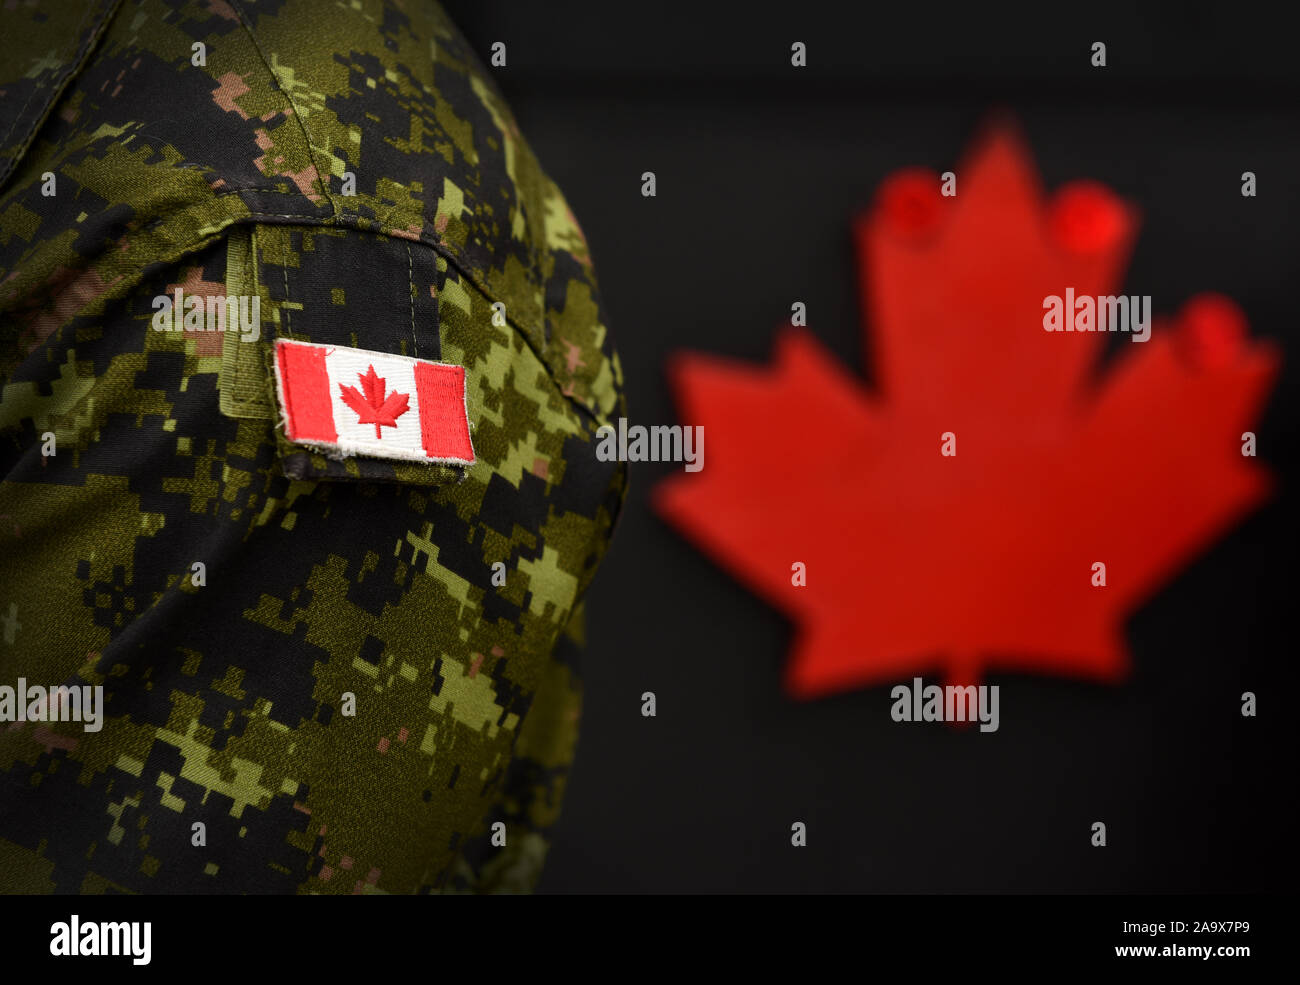 Canada Day. Flag of Canada on the military uniform and red Maple leaf on the background. Canadian soldiers. Army of Canada. Canada leaf. Remembrance D Stock Photo